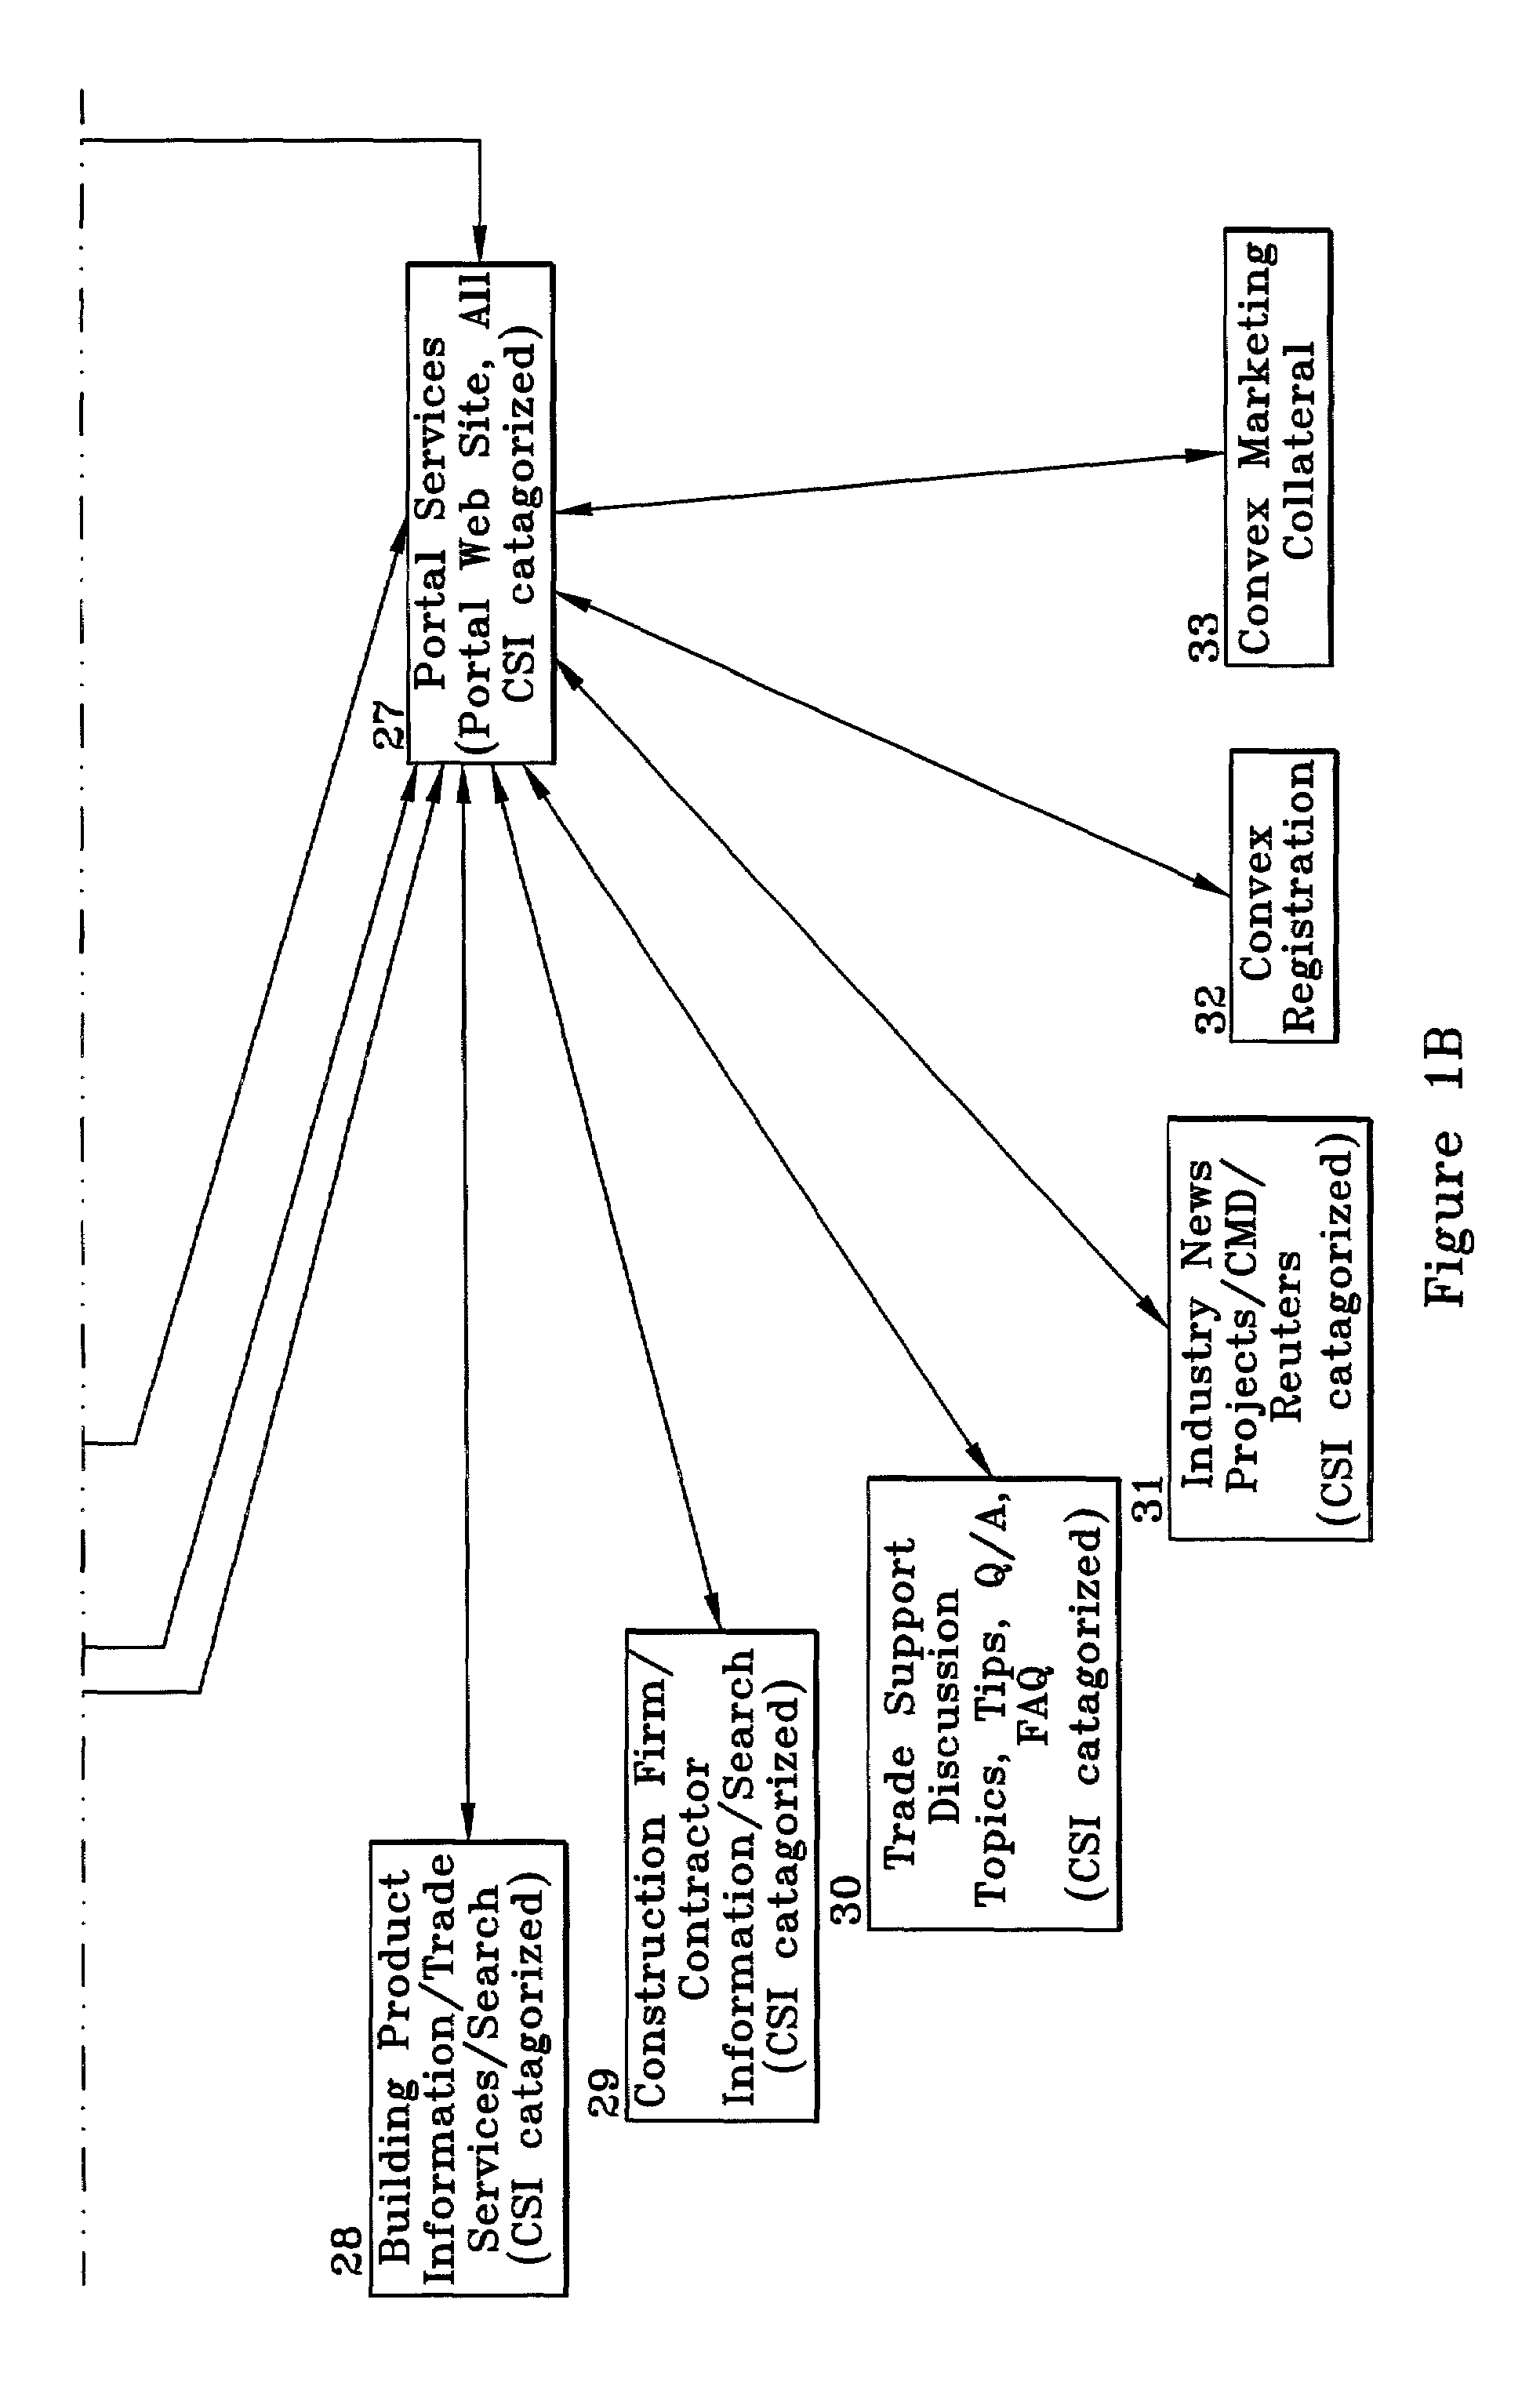 E-commerce bid and project management system and method for the construction industry